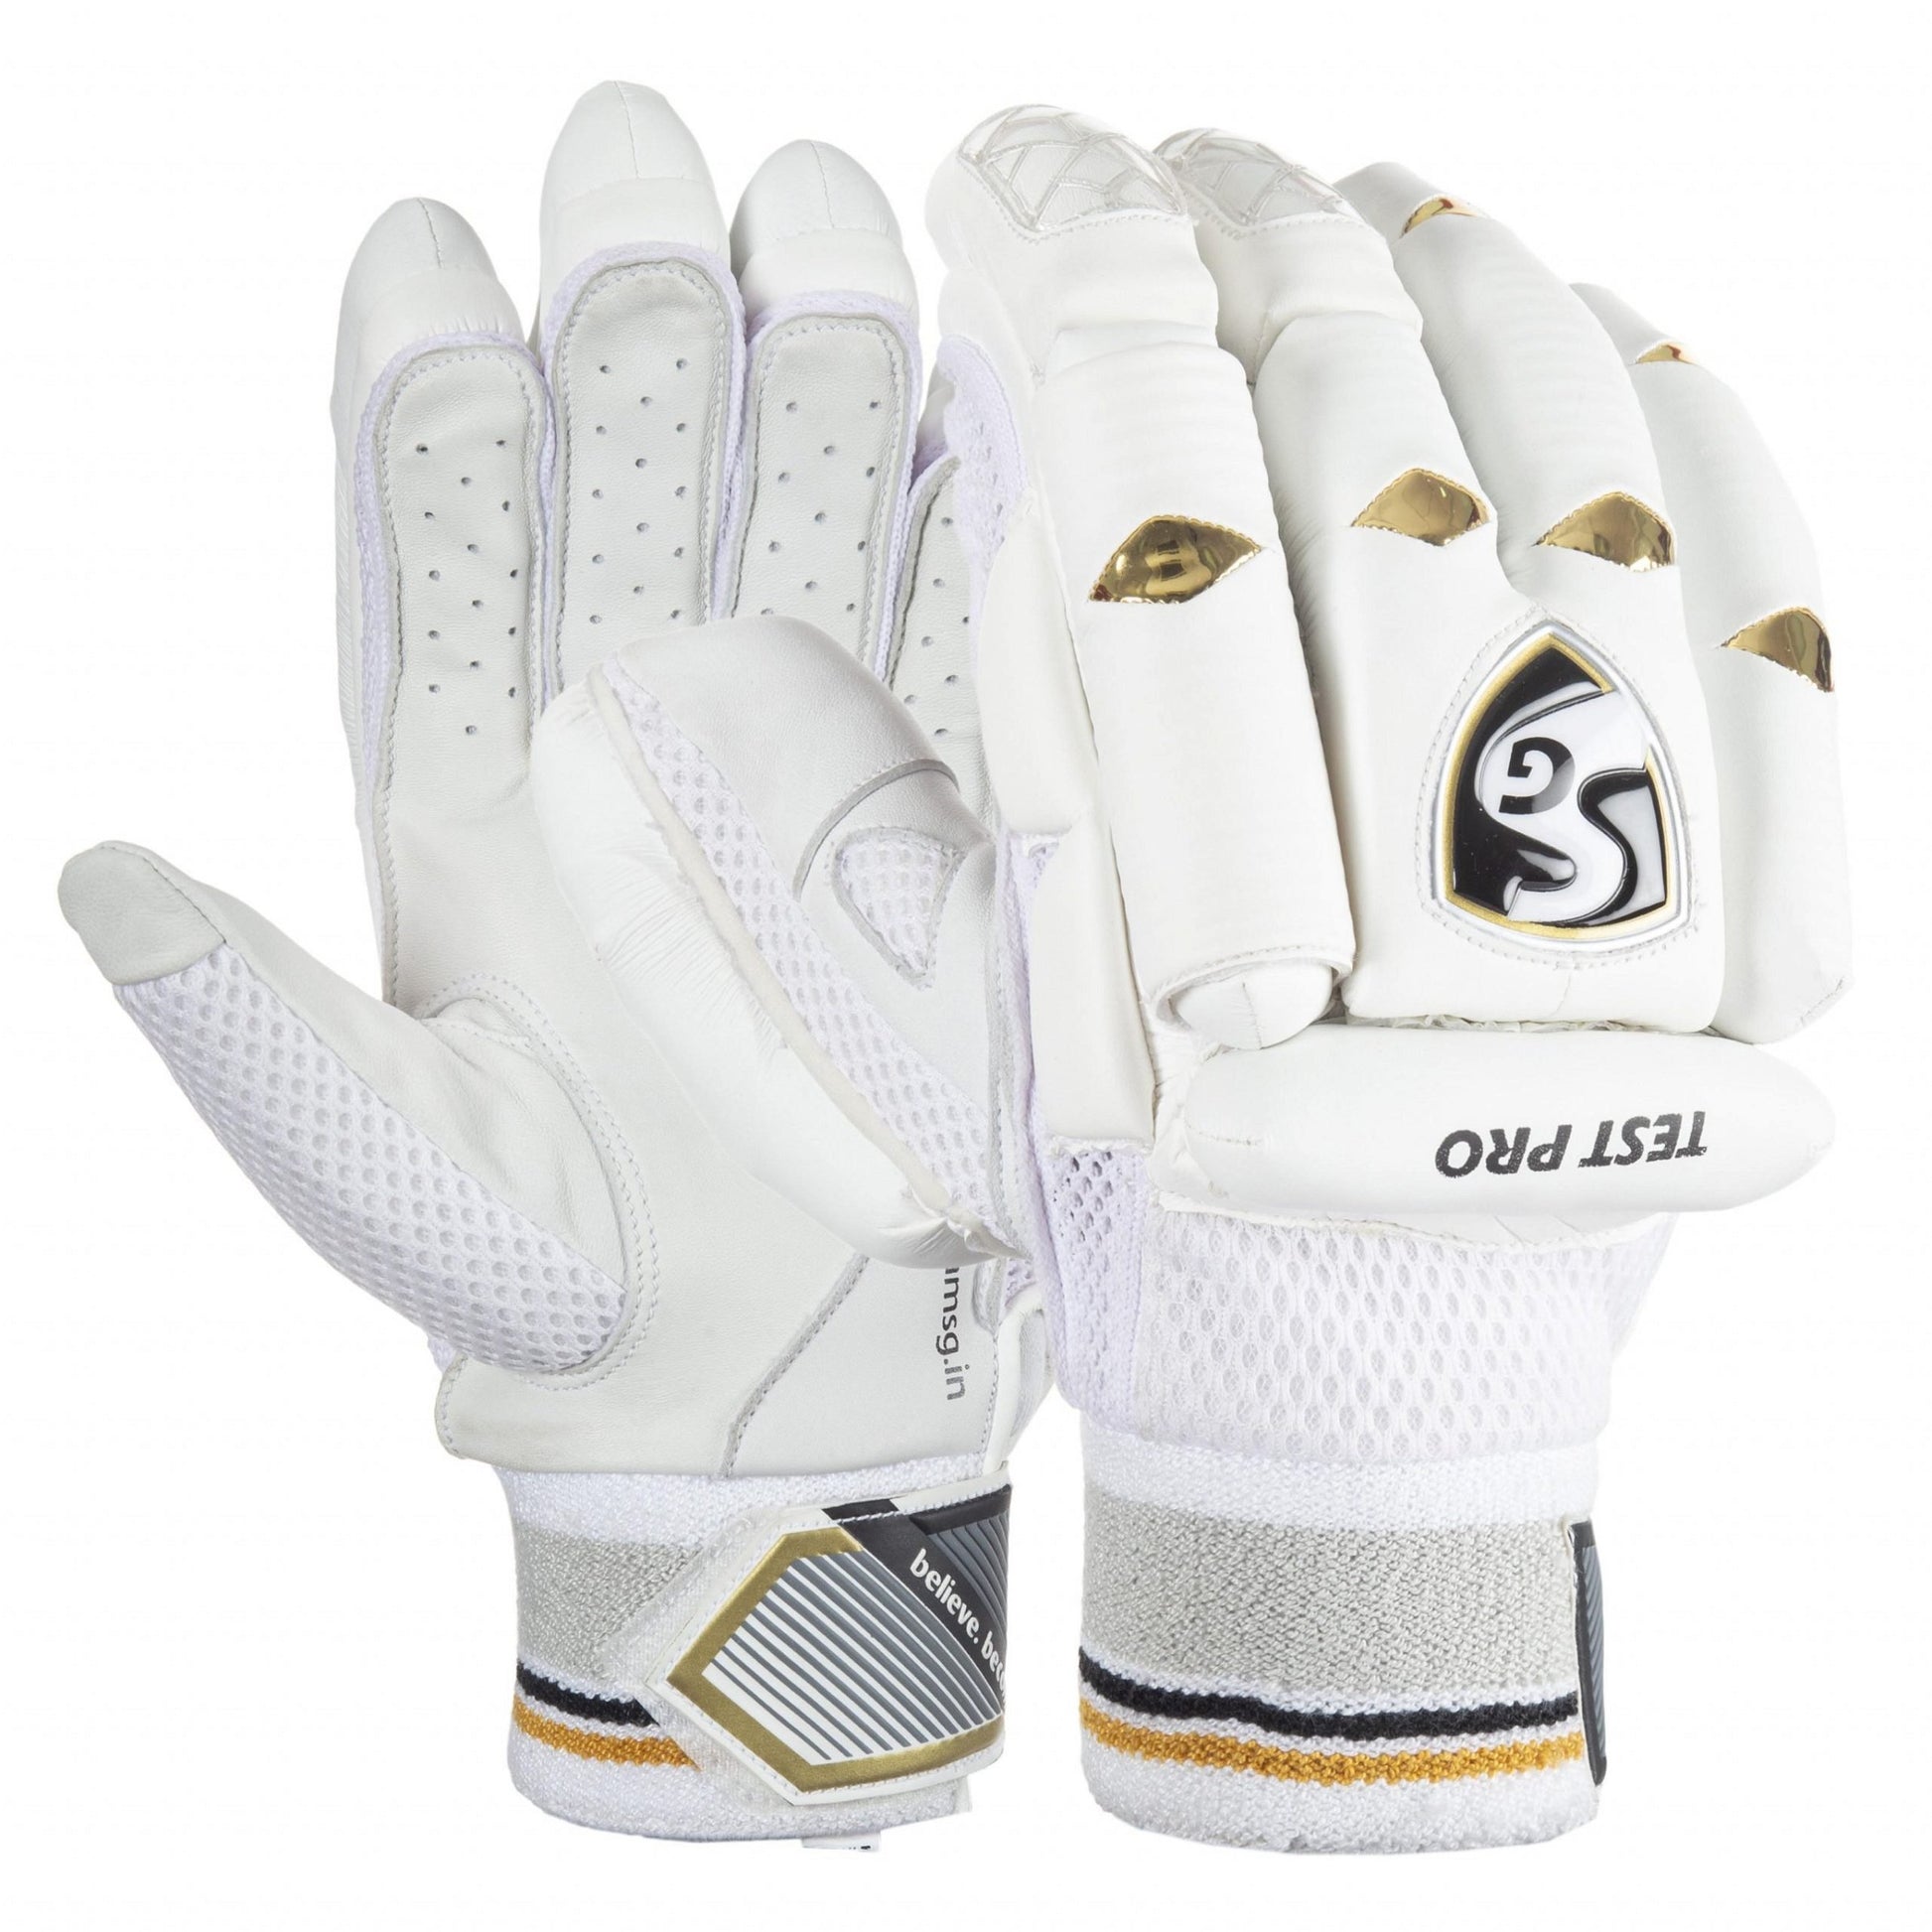 SG Test Pro™ Batting Gloves with Premium Quality Sheep Leather Palm